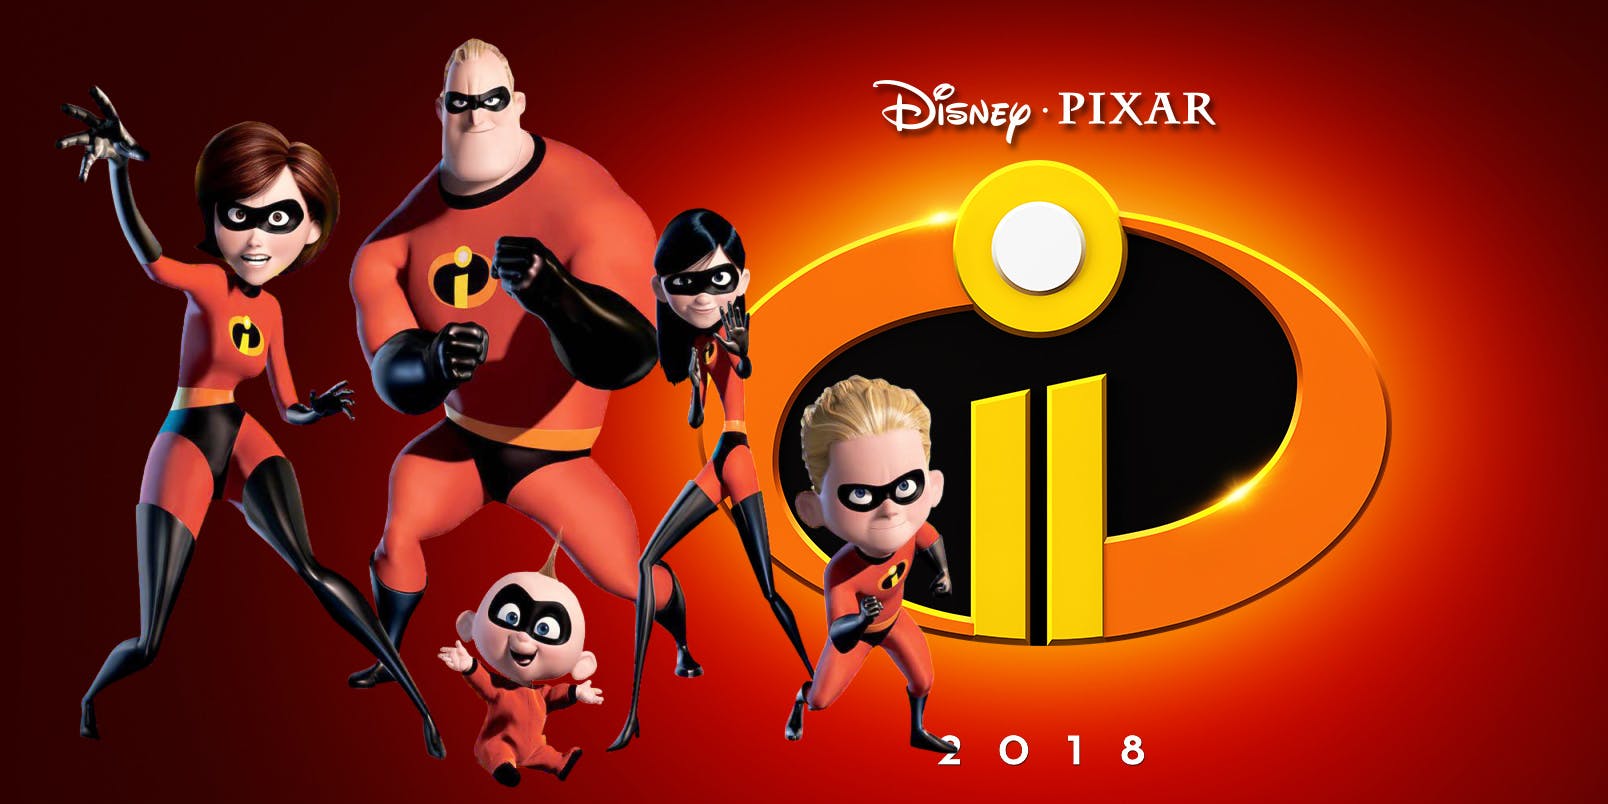 Incredibles 2 Quick Movie Review: It Is As Incredible As It Gets!